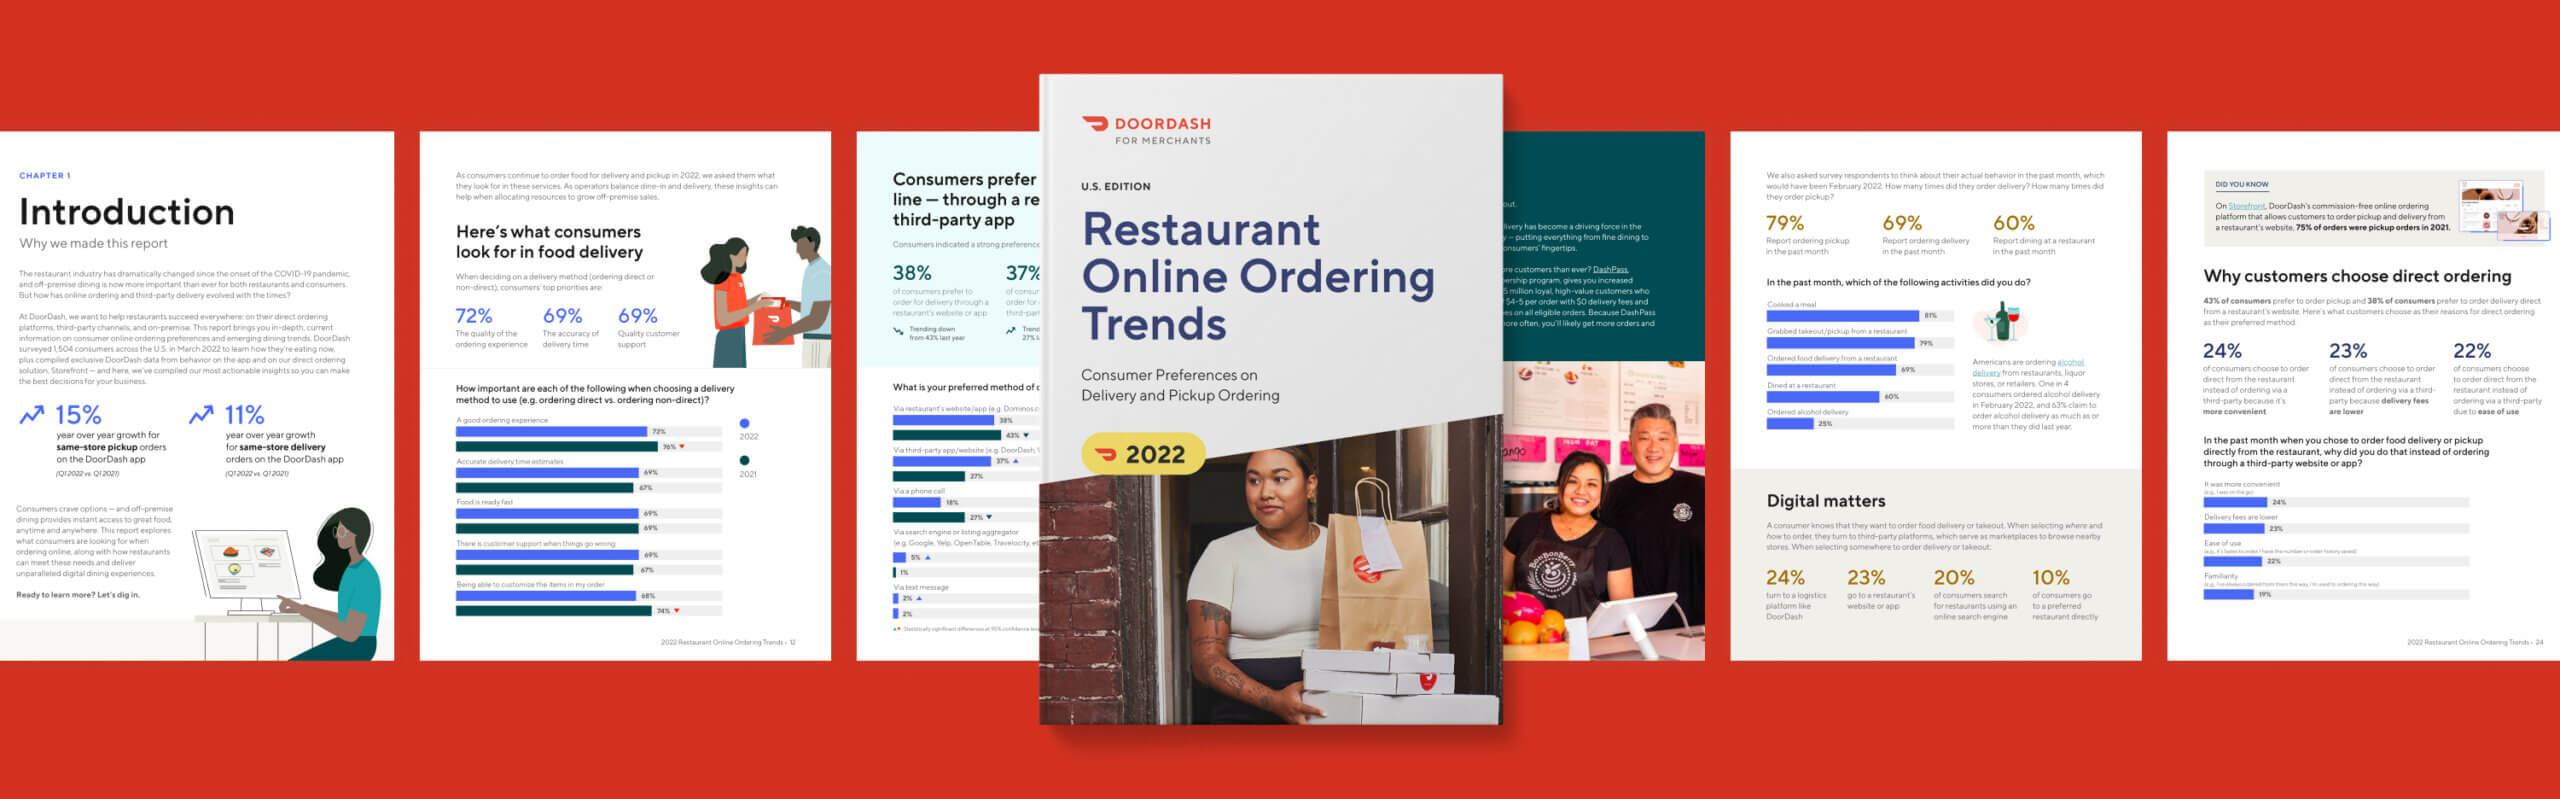 DoorDash report and six interior pages behind it